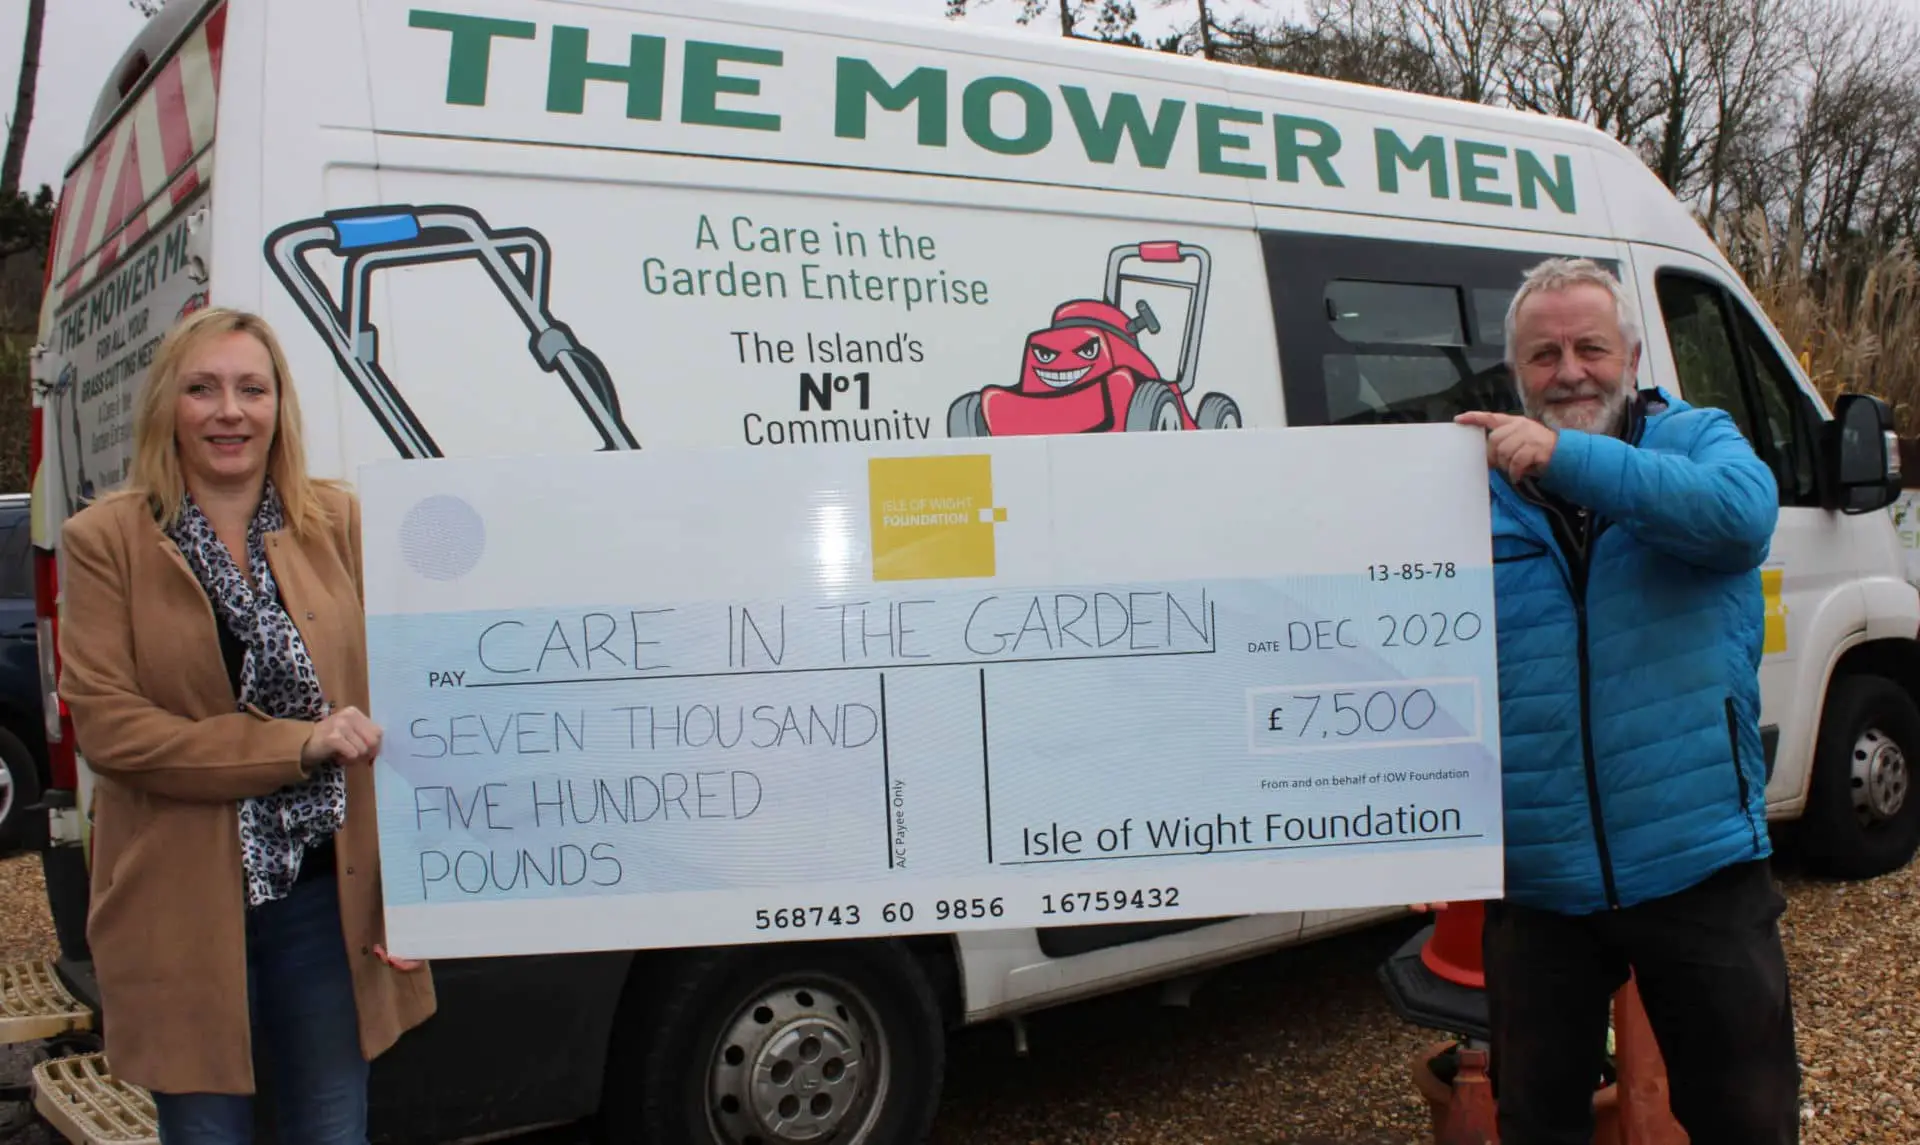 Large cheque being held by Care in the garden staff